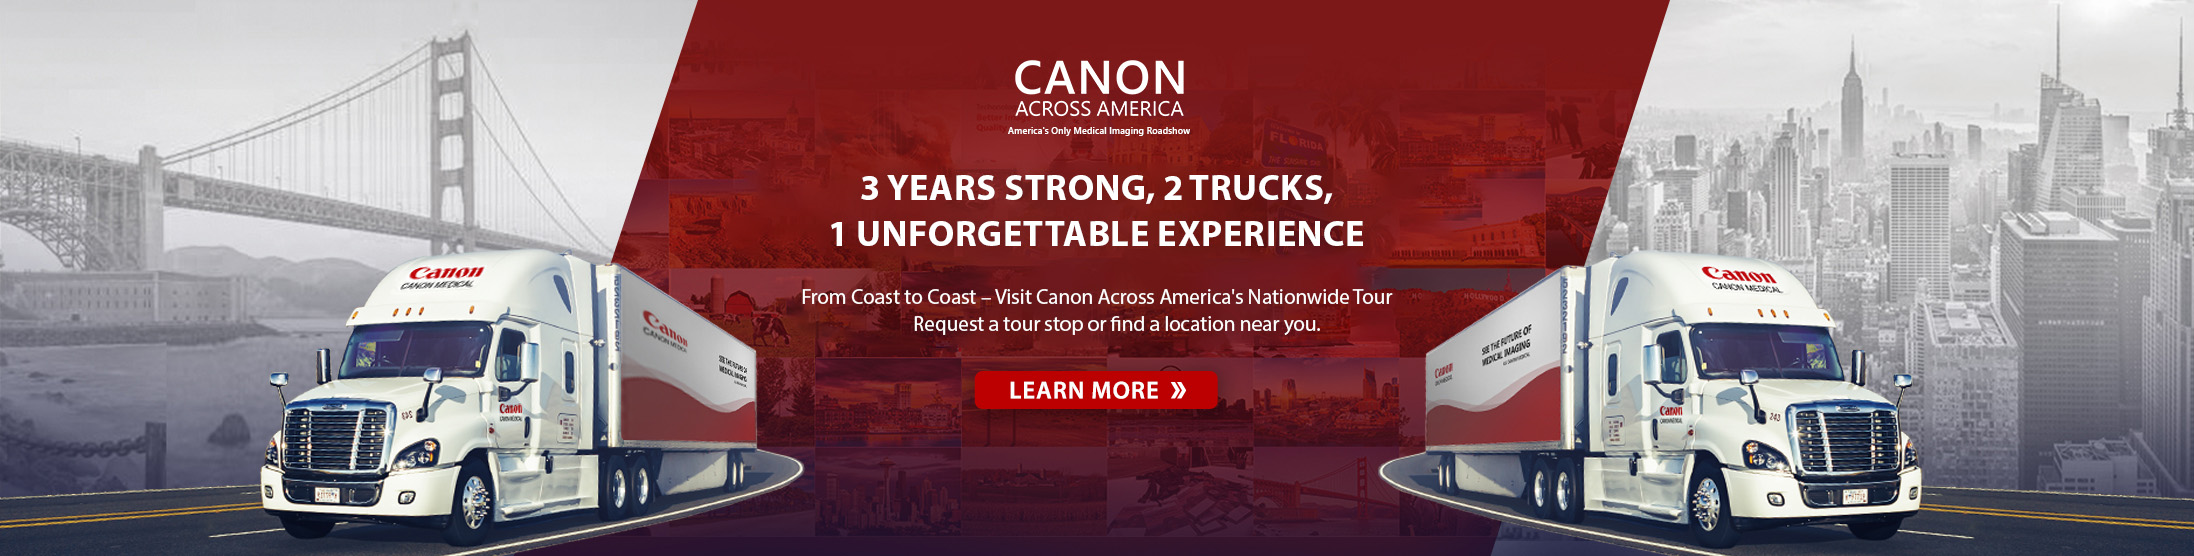 Canon Across America: 3 Years Strong, 2 Trucks, 1 Unforgettable Experience | Learn More